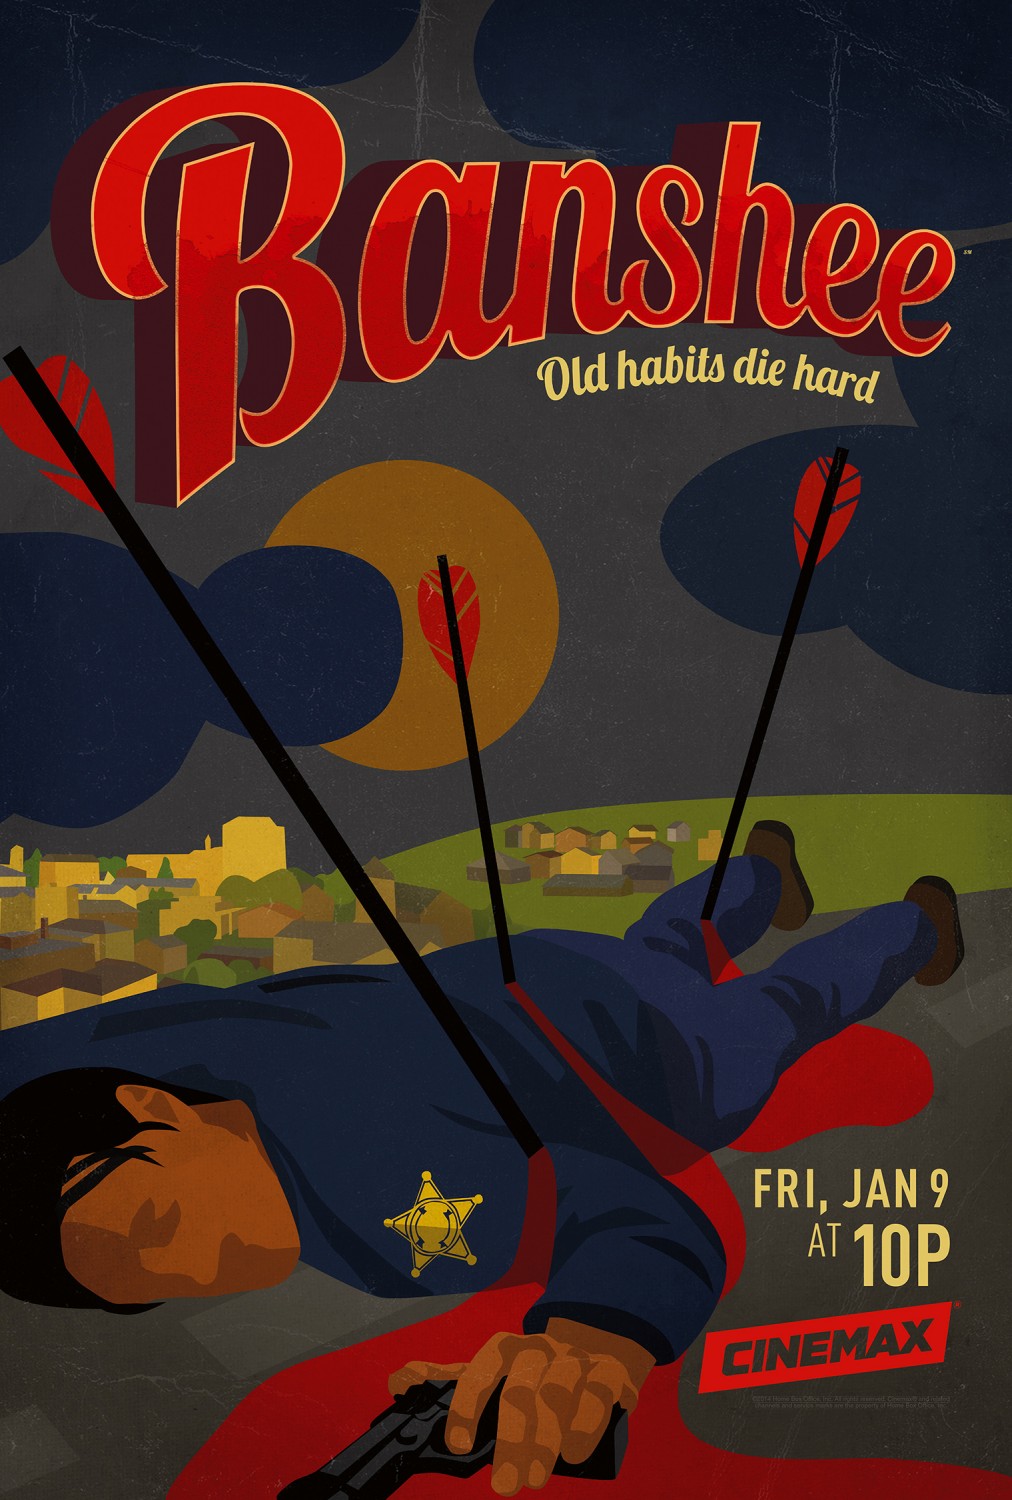 Extra Large TV Poster Image for Banshee (#7 of 18)